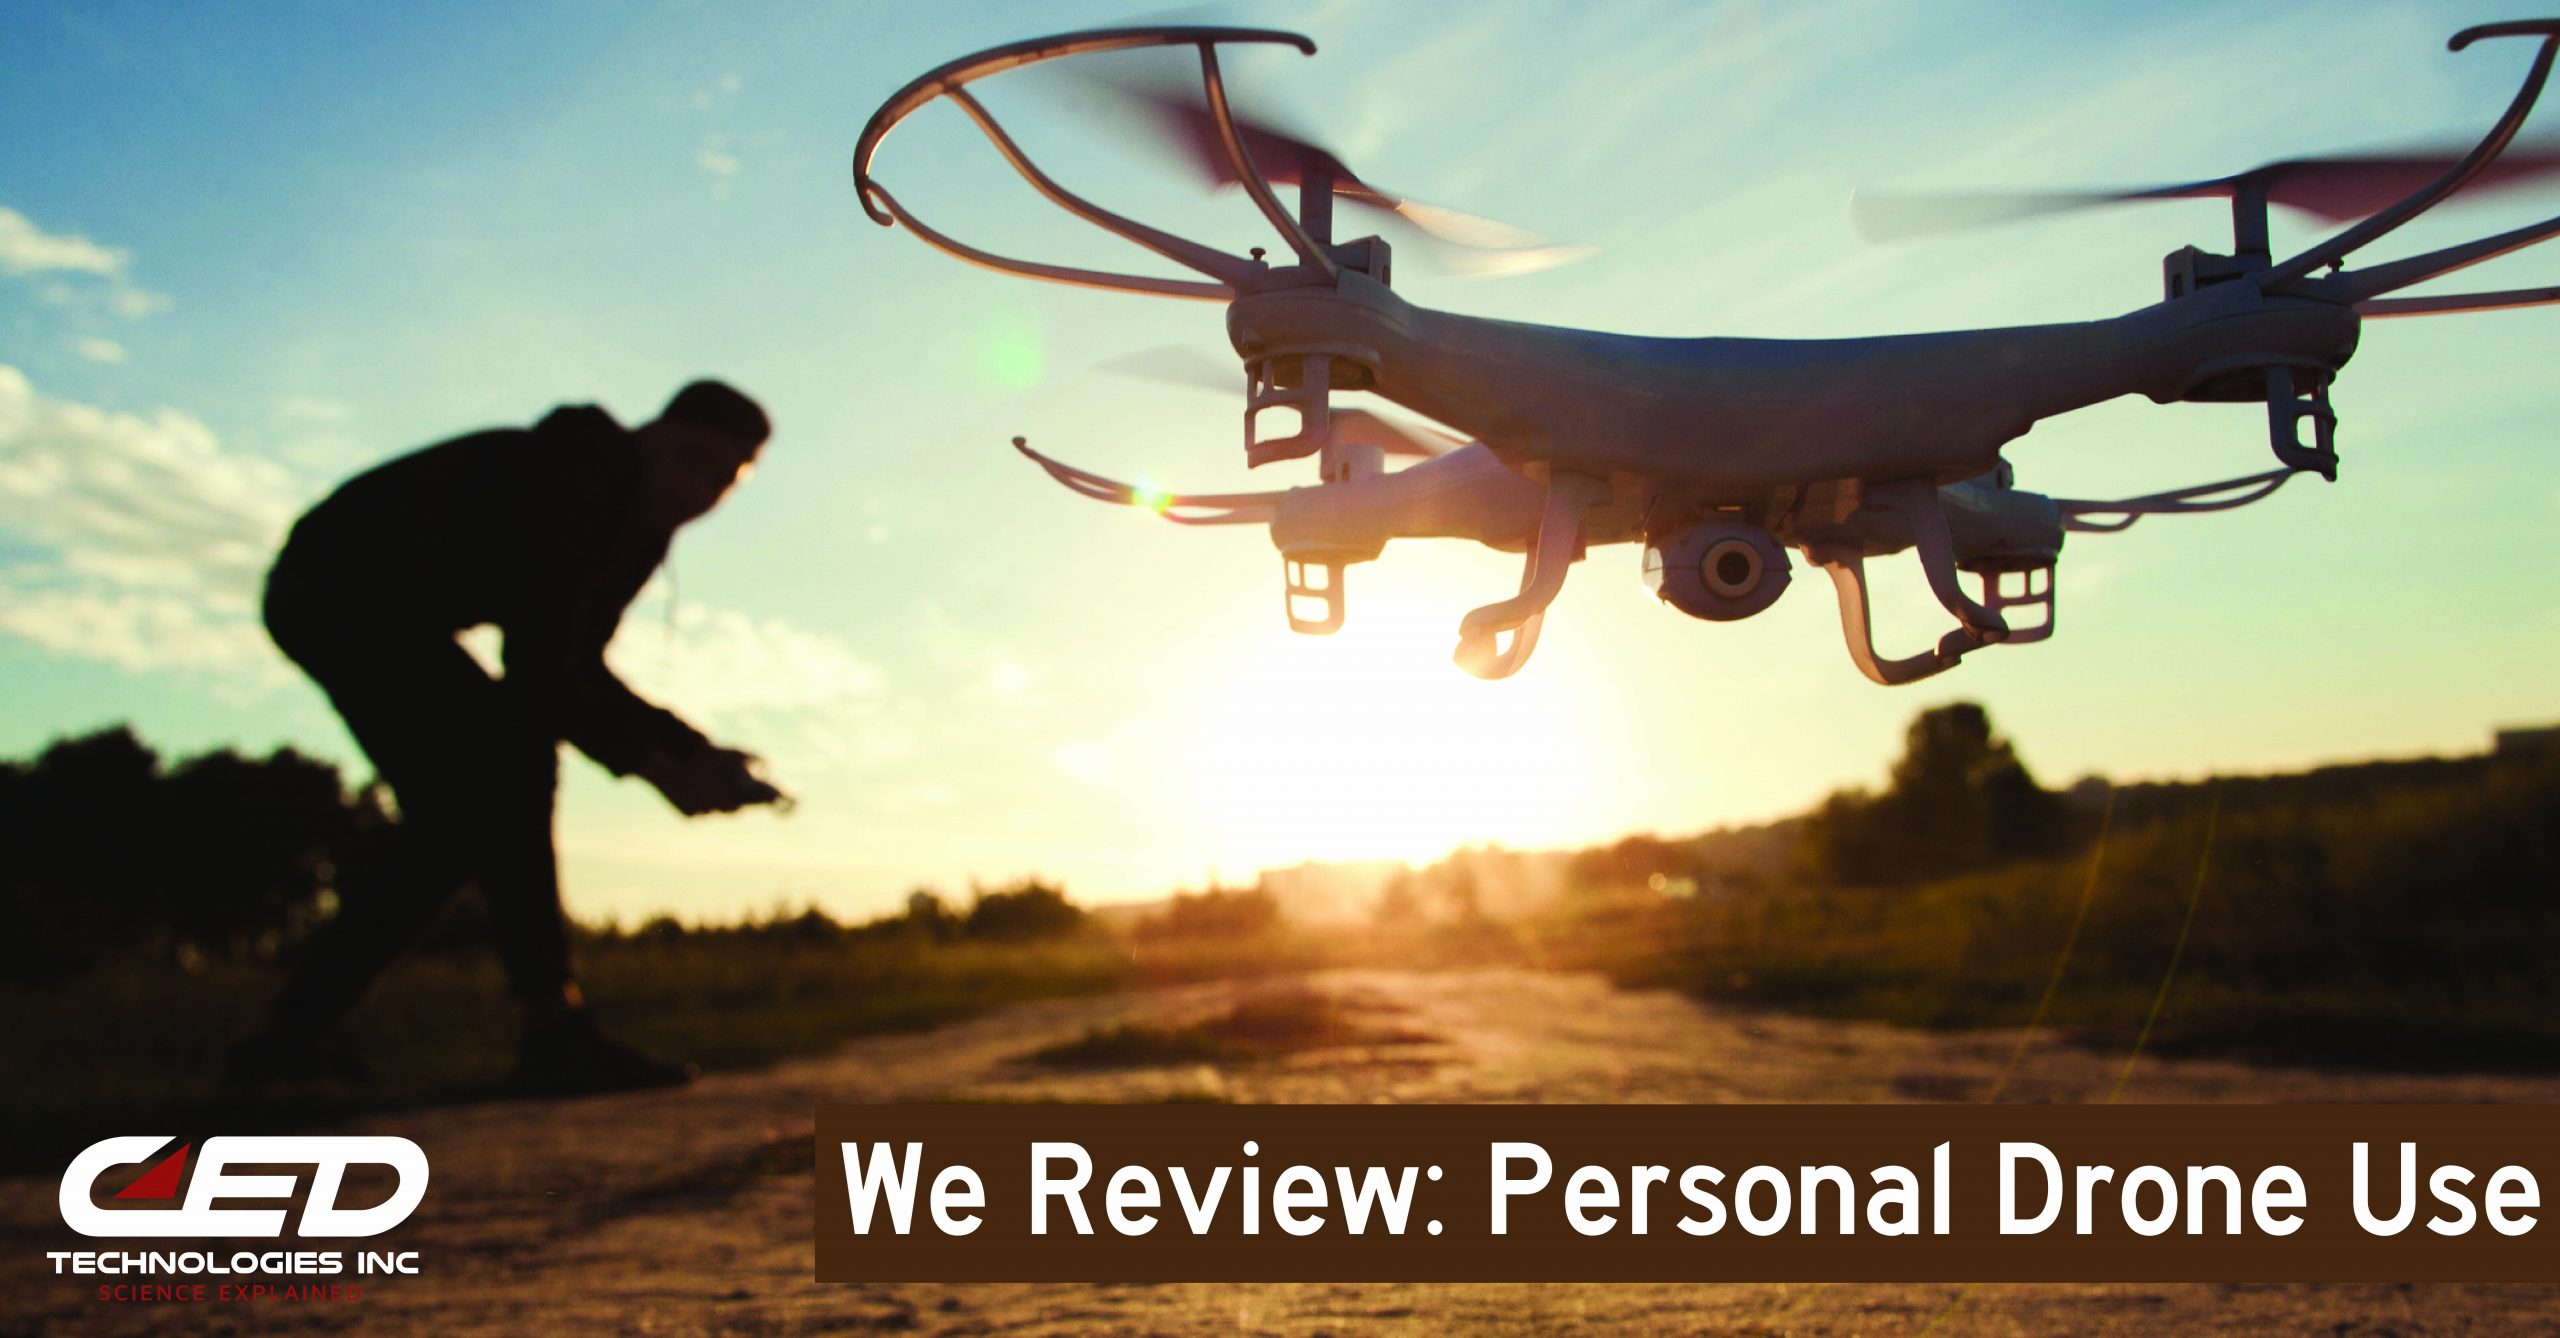 Learning to Fly – The Recreational Use of Drones